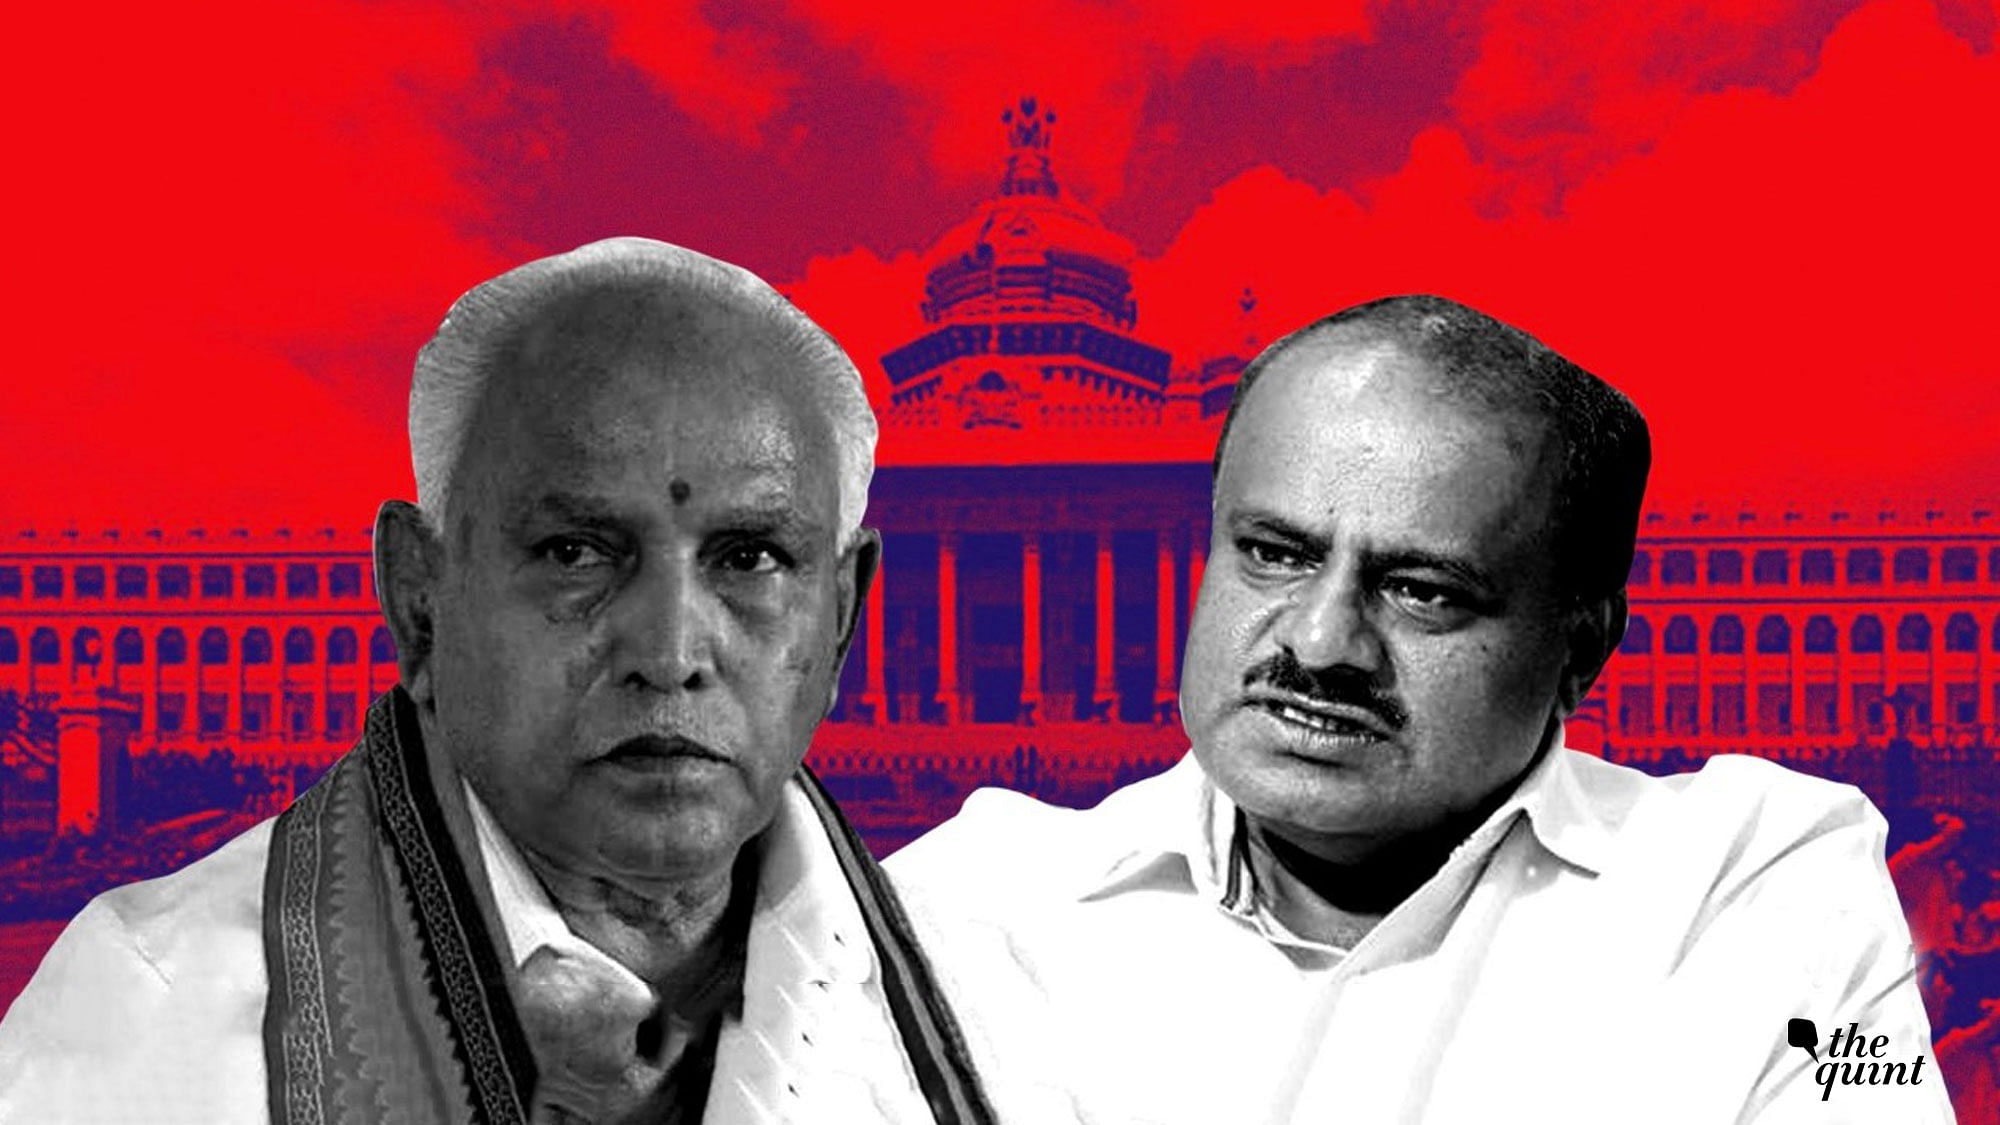 Karnataka is reeling in political crisis since two Independent MLAS withdrew support from the Congress-JD(S)-led government in the state.